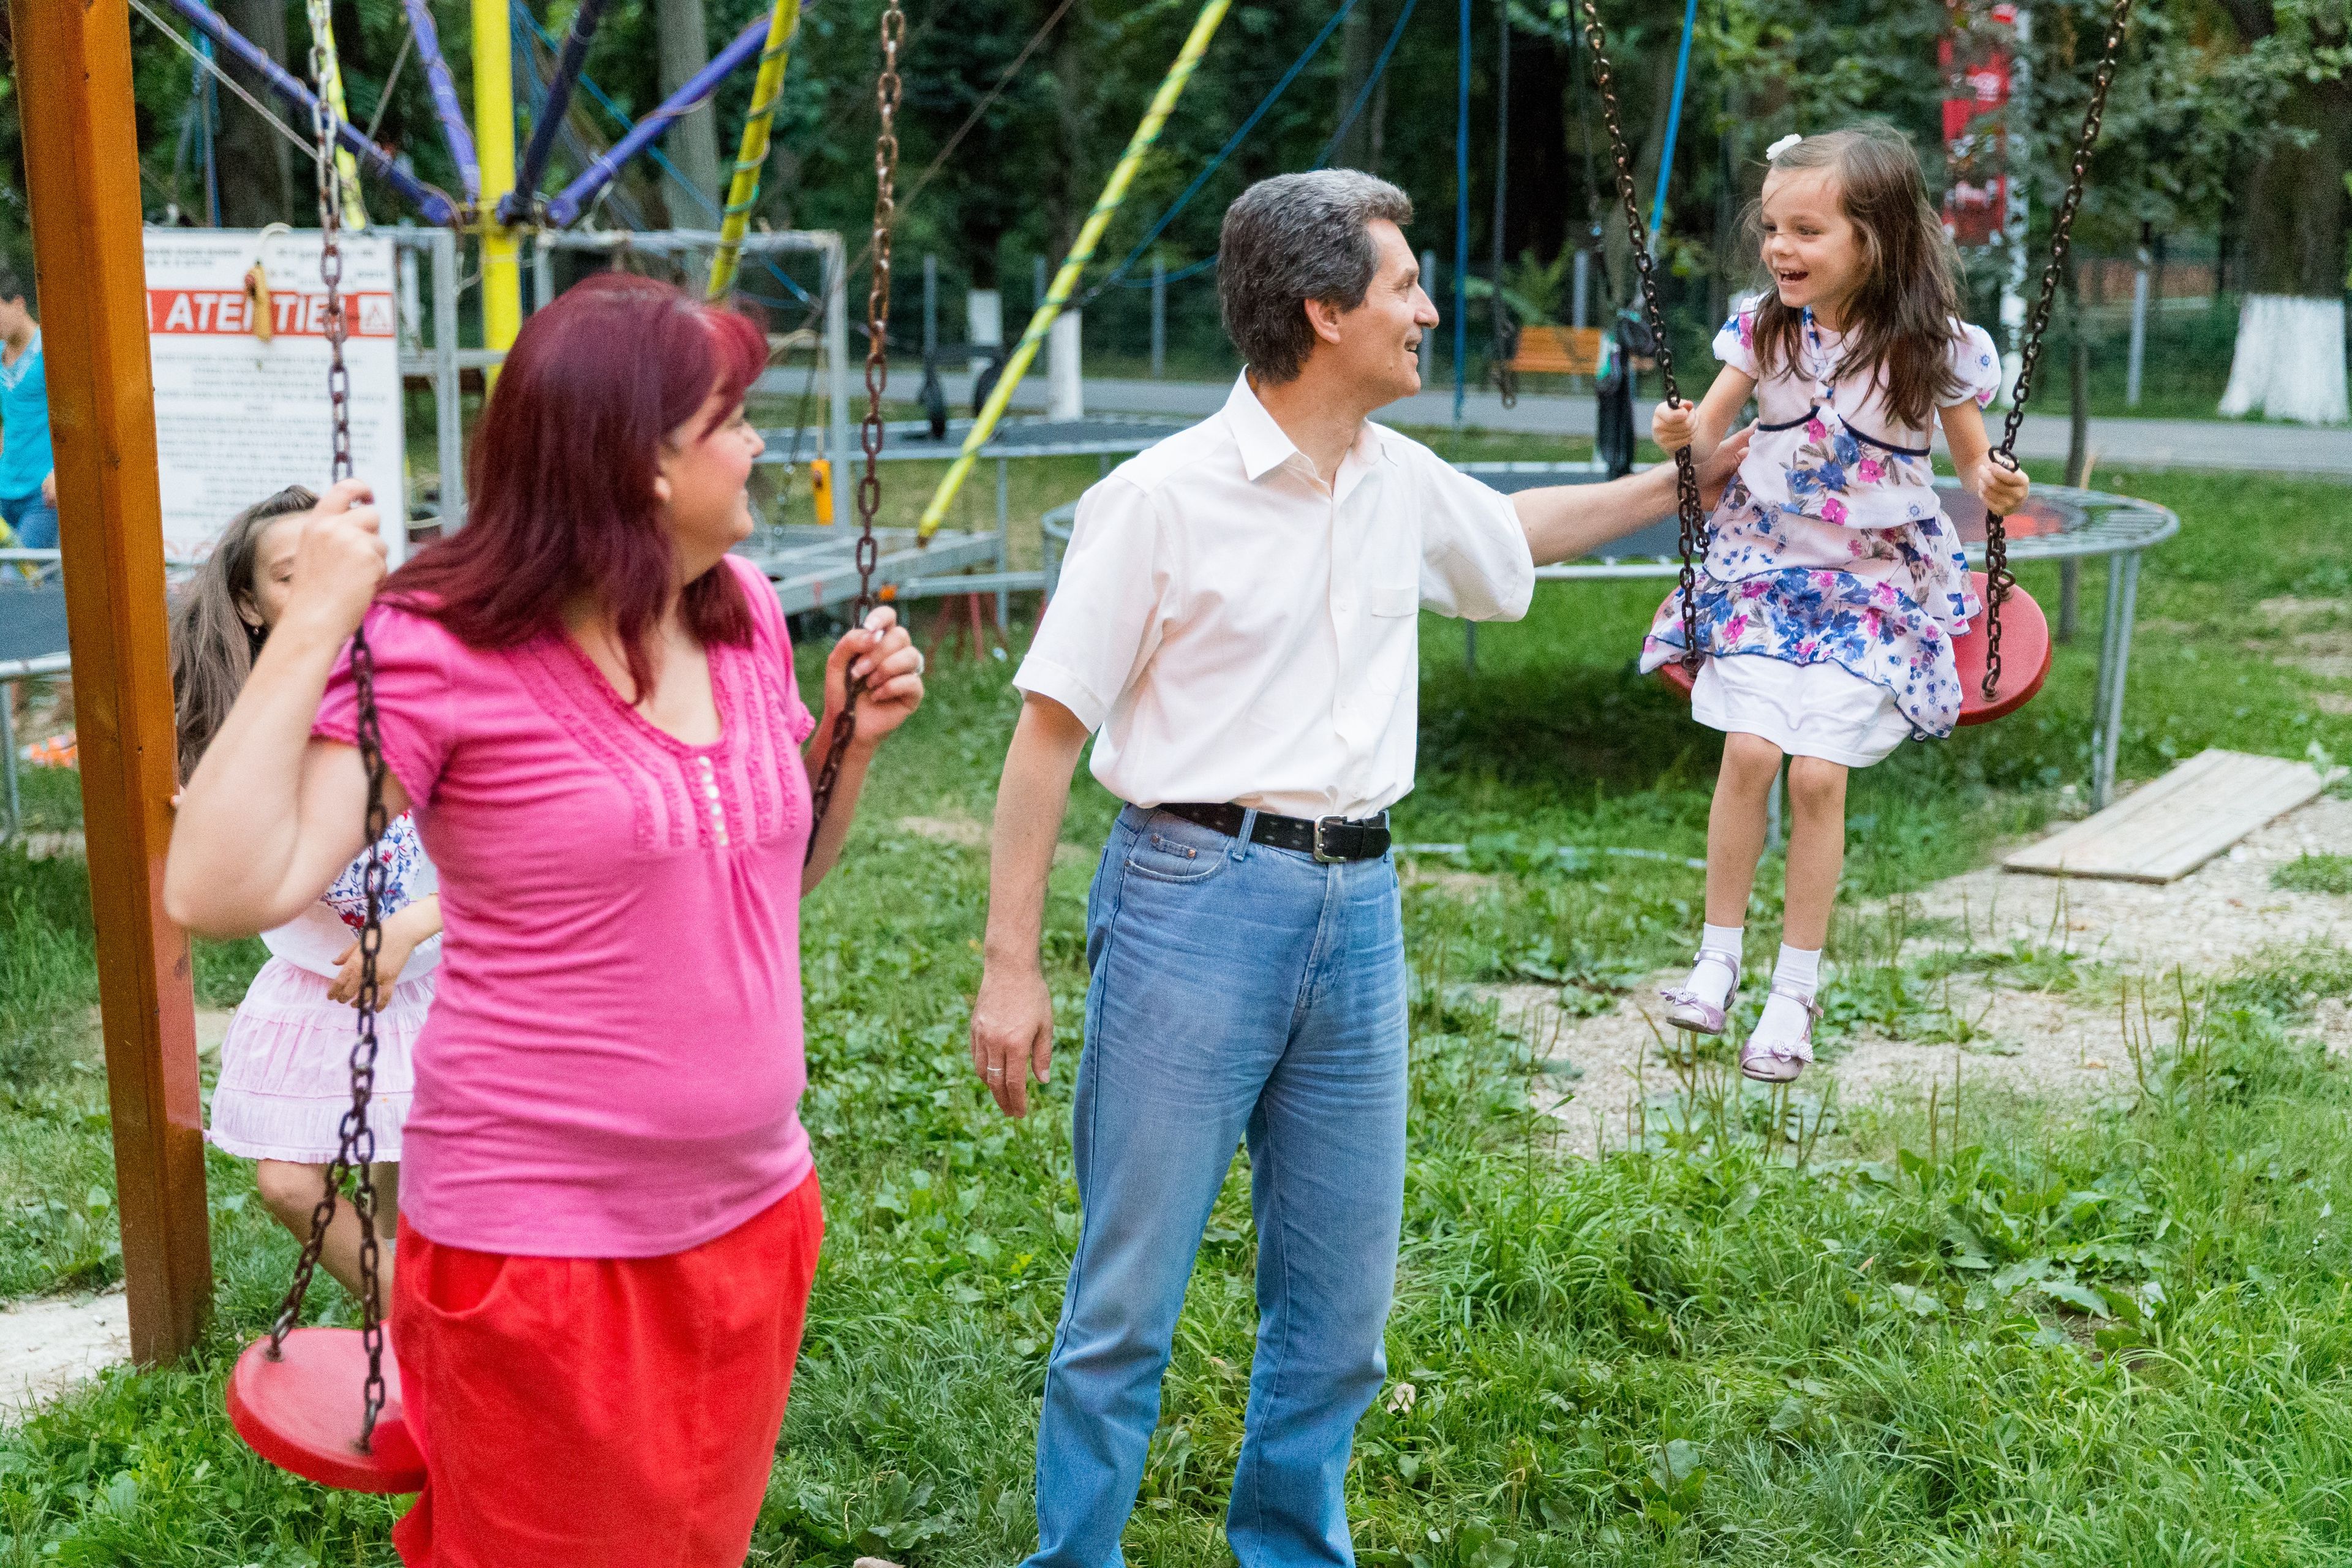 A family in Moldova playing on the swings together.